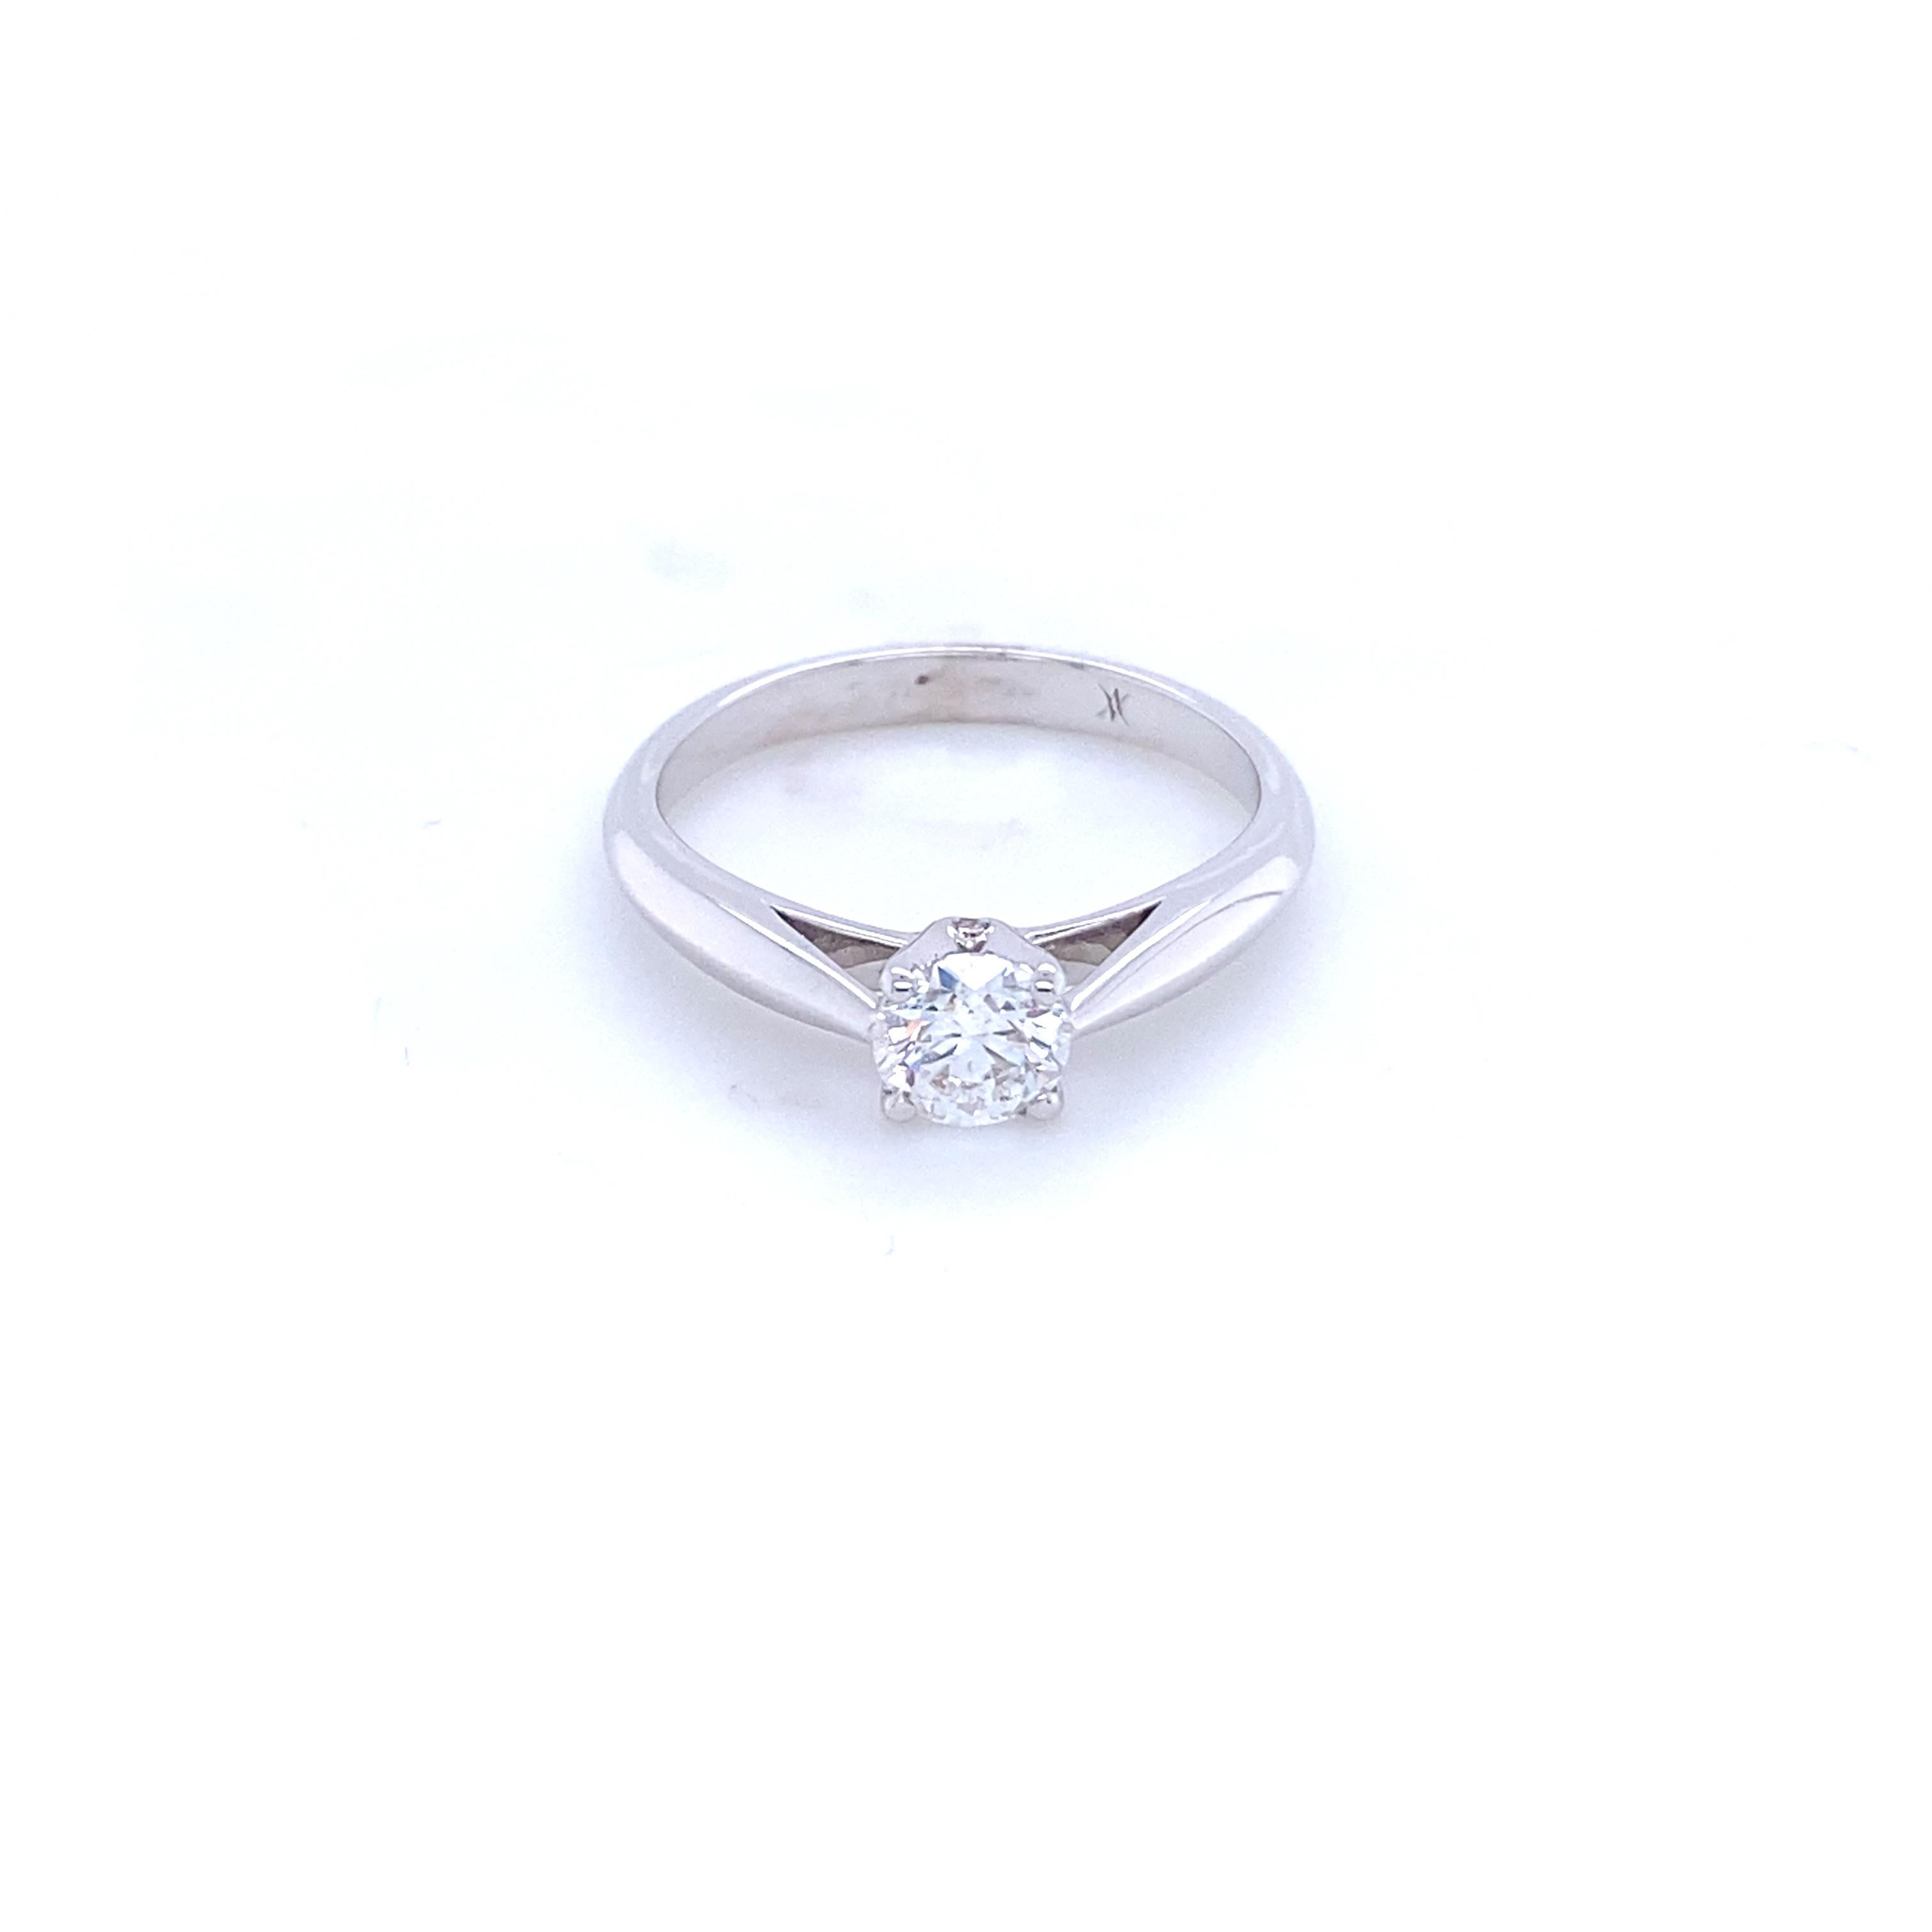 GIA Certified 0.56 Carat Diamond Ring White Gold For Sale 2